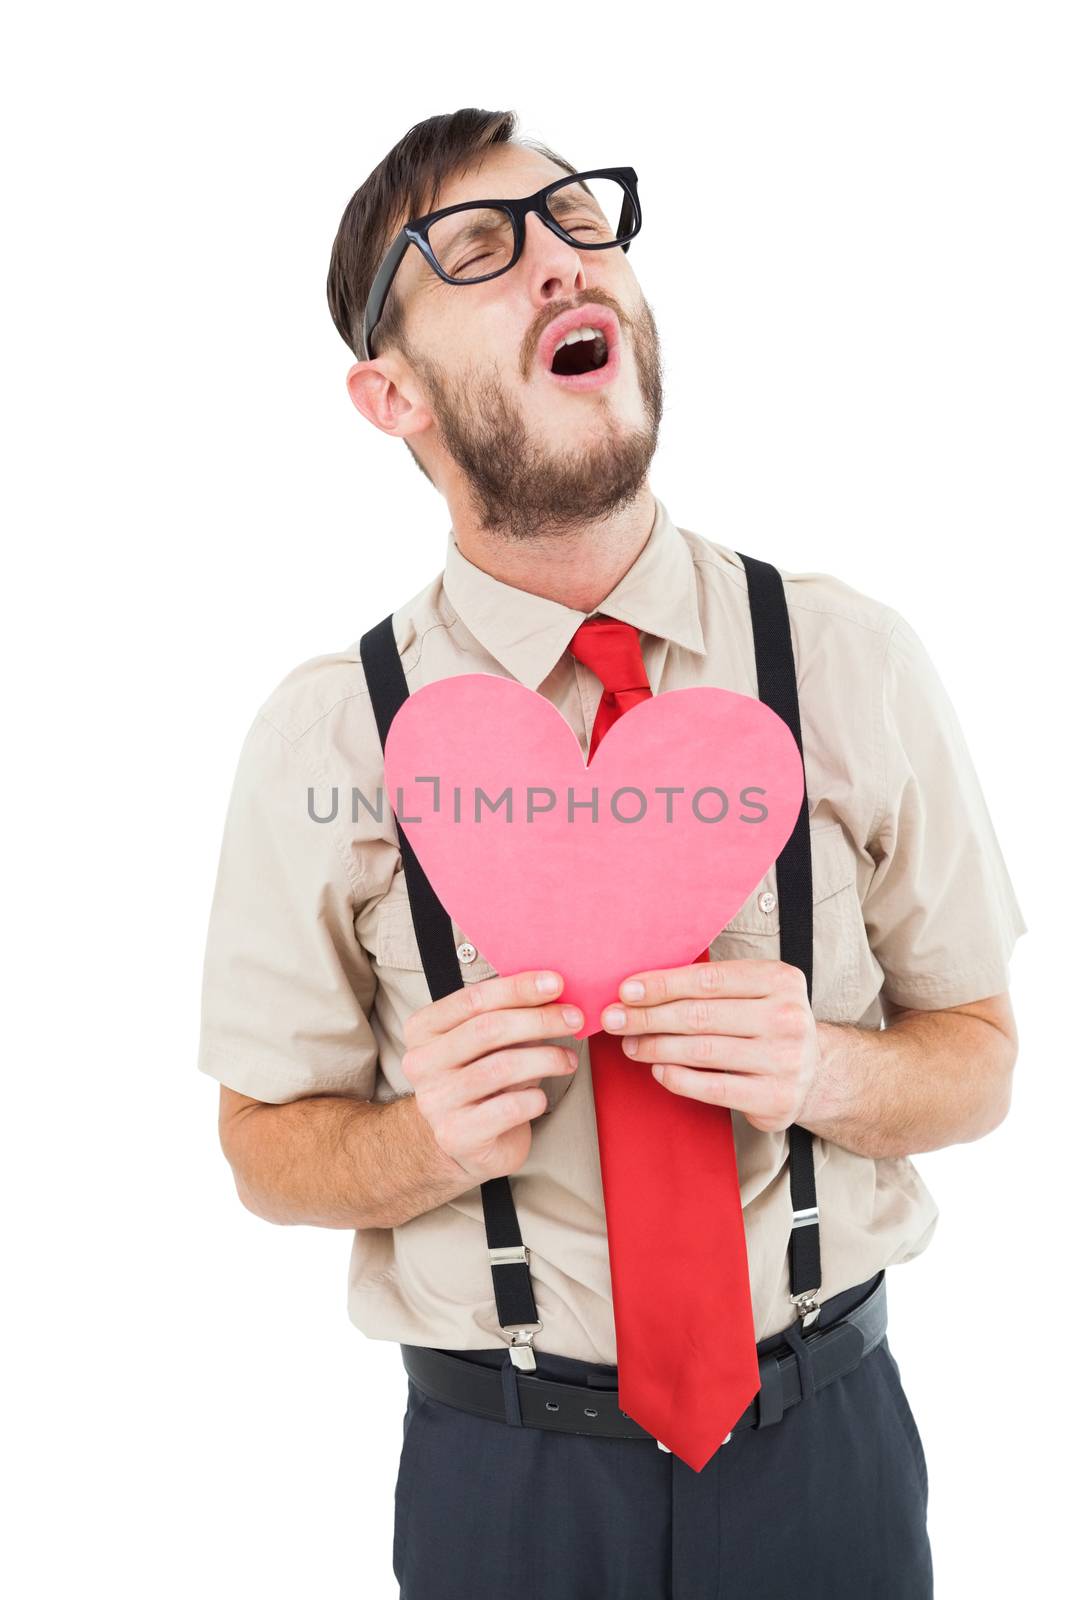 Geeky hipster crying and holding heart card by Wavebreakmedia